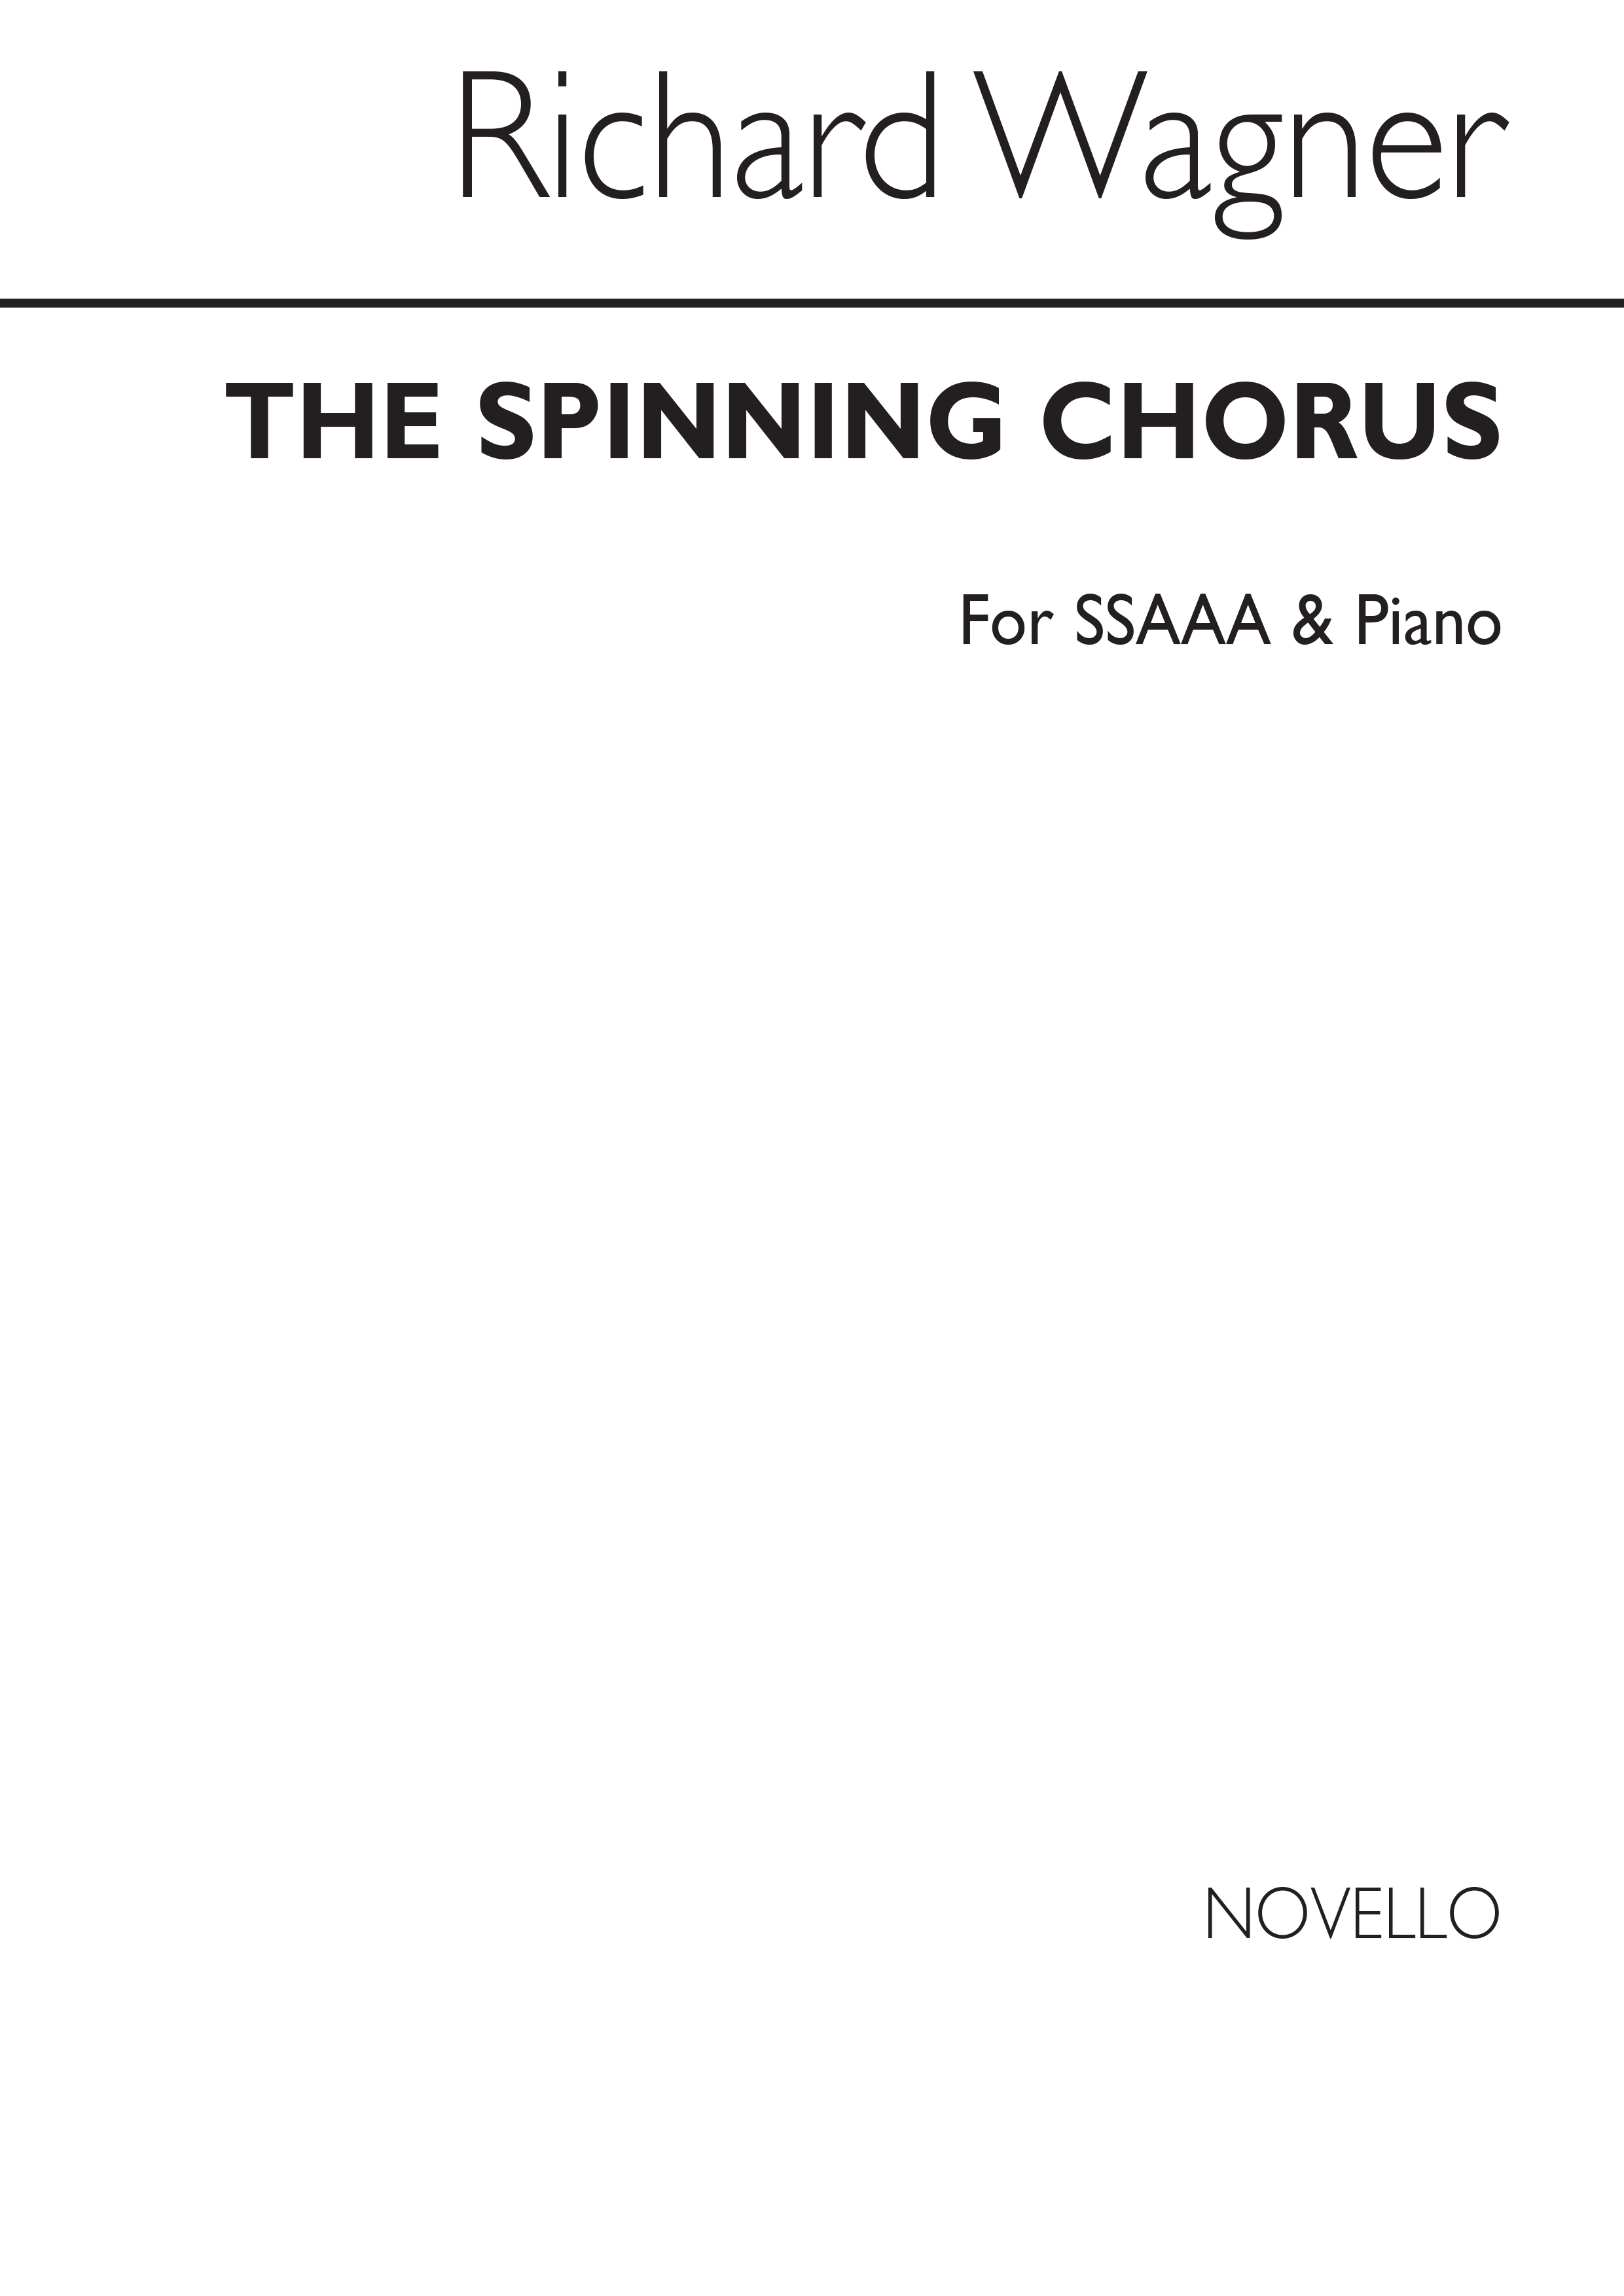 Richard Wagner: Wagner Spinning Chorus 3-part: SSAA: Vocal Score